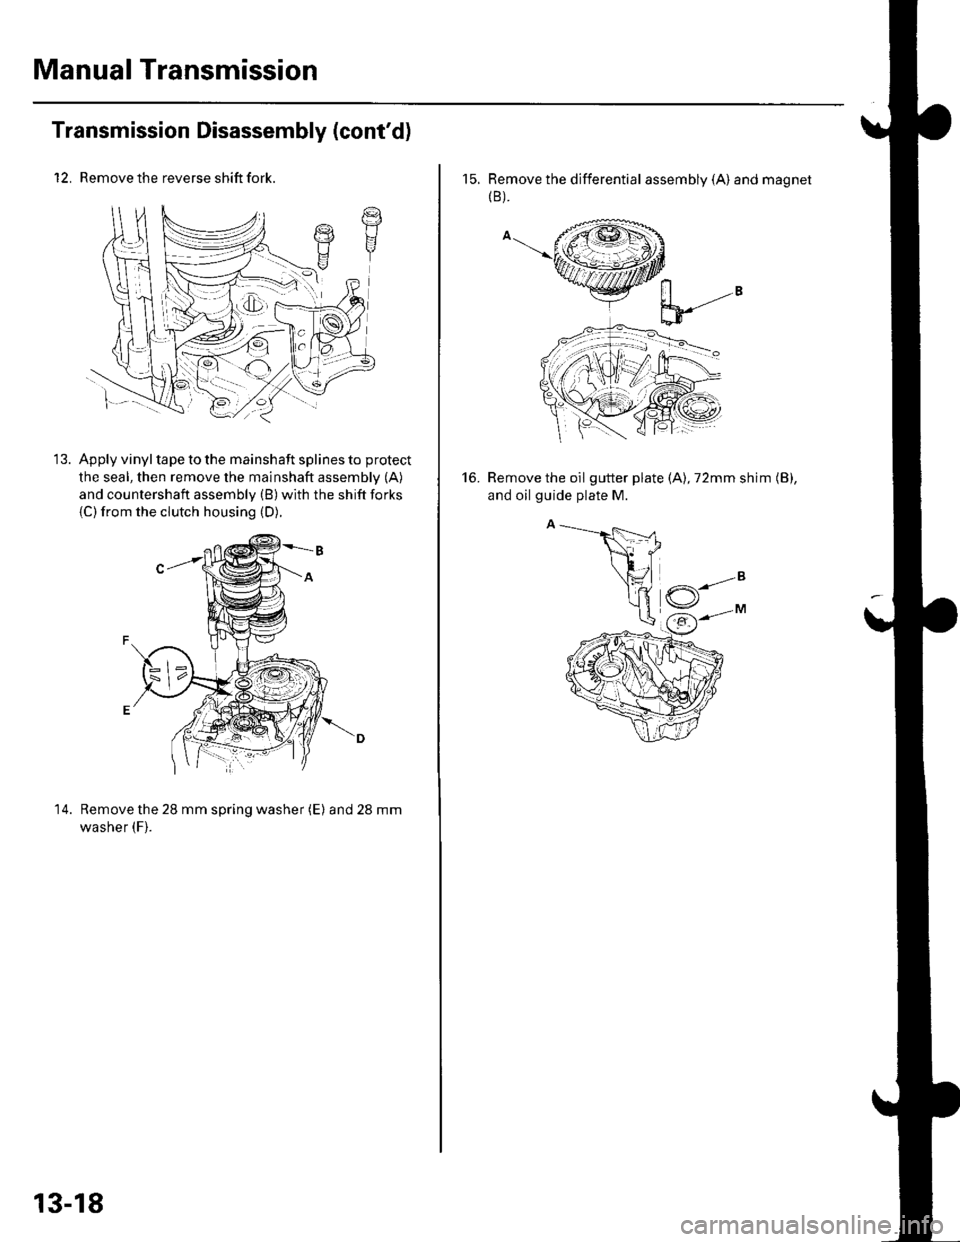 HONDA CIVIC 2003 7.G User Guide Manual Transmission
Transmission Disassembly (contd)
12. Remove the reverse shift fork.
Apply vinyl tape to the mainshaft splines to protect
the seal, then remove the mainshaft assembly (A)
and count